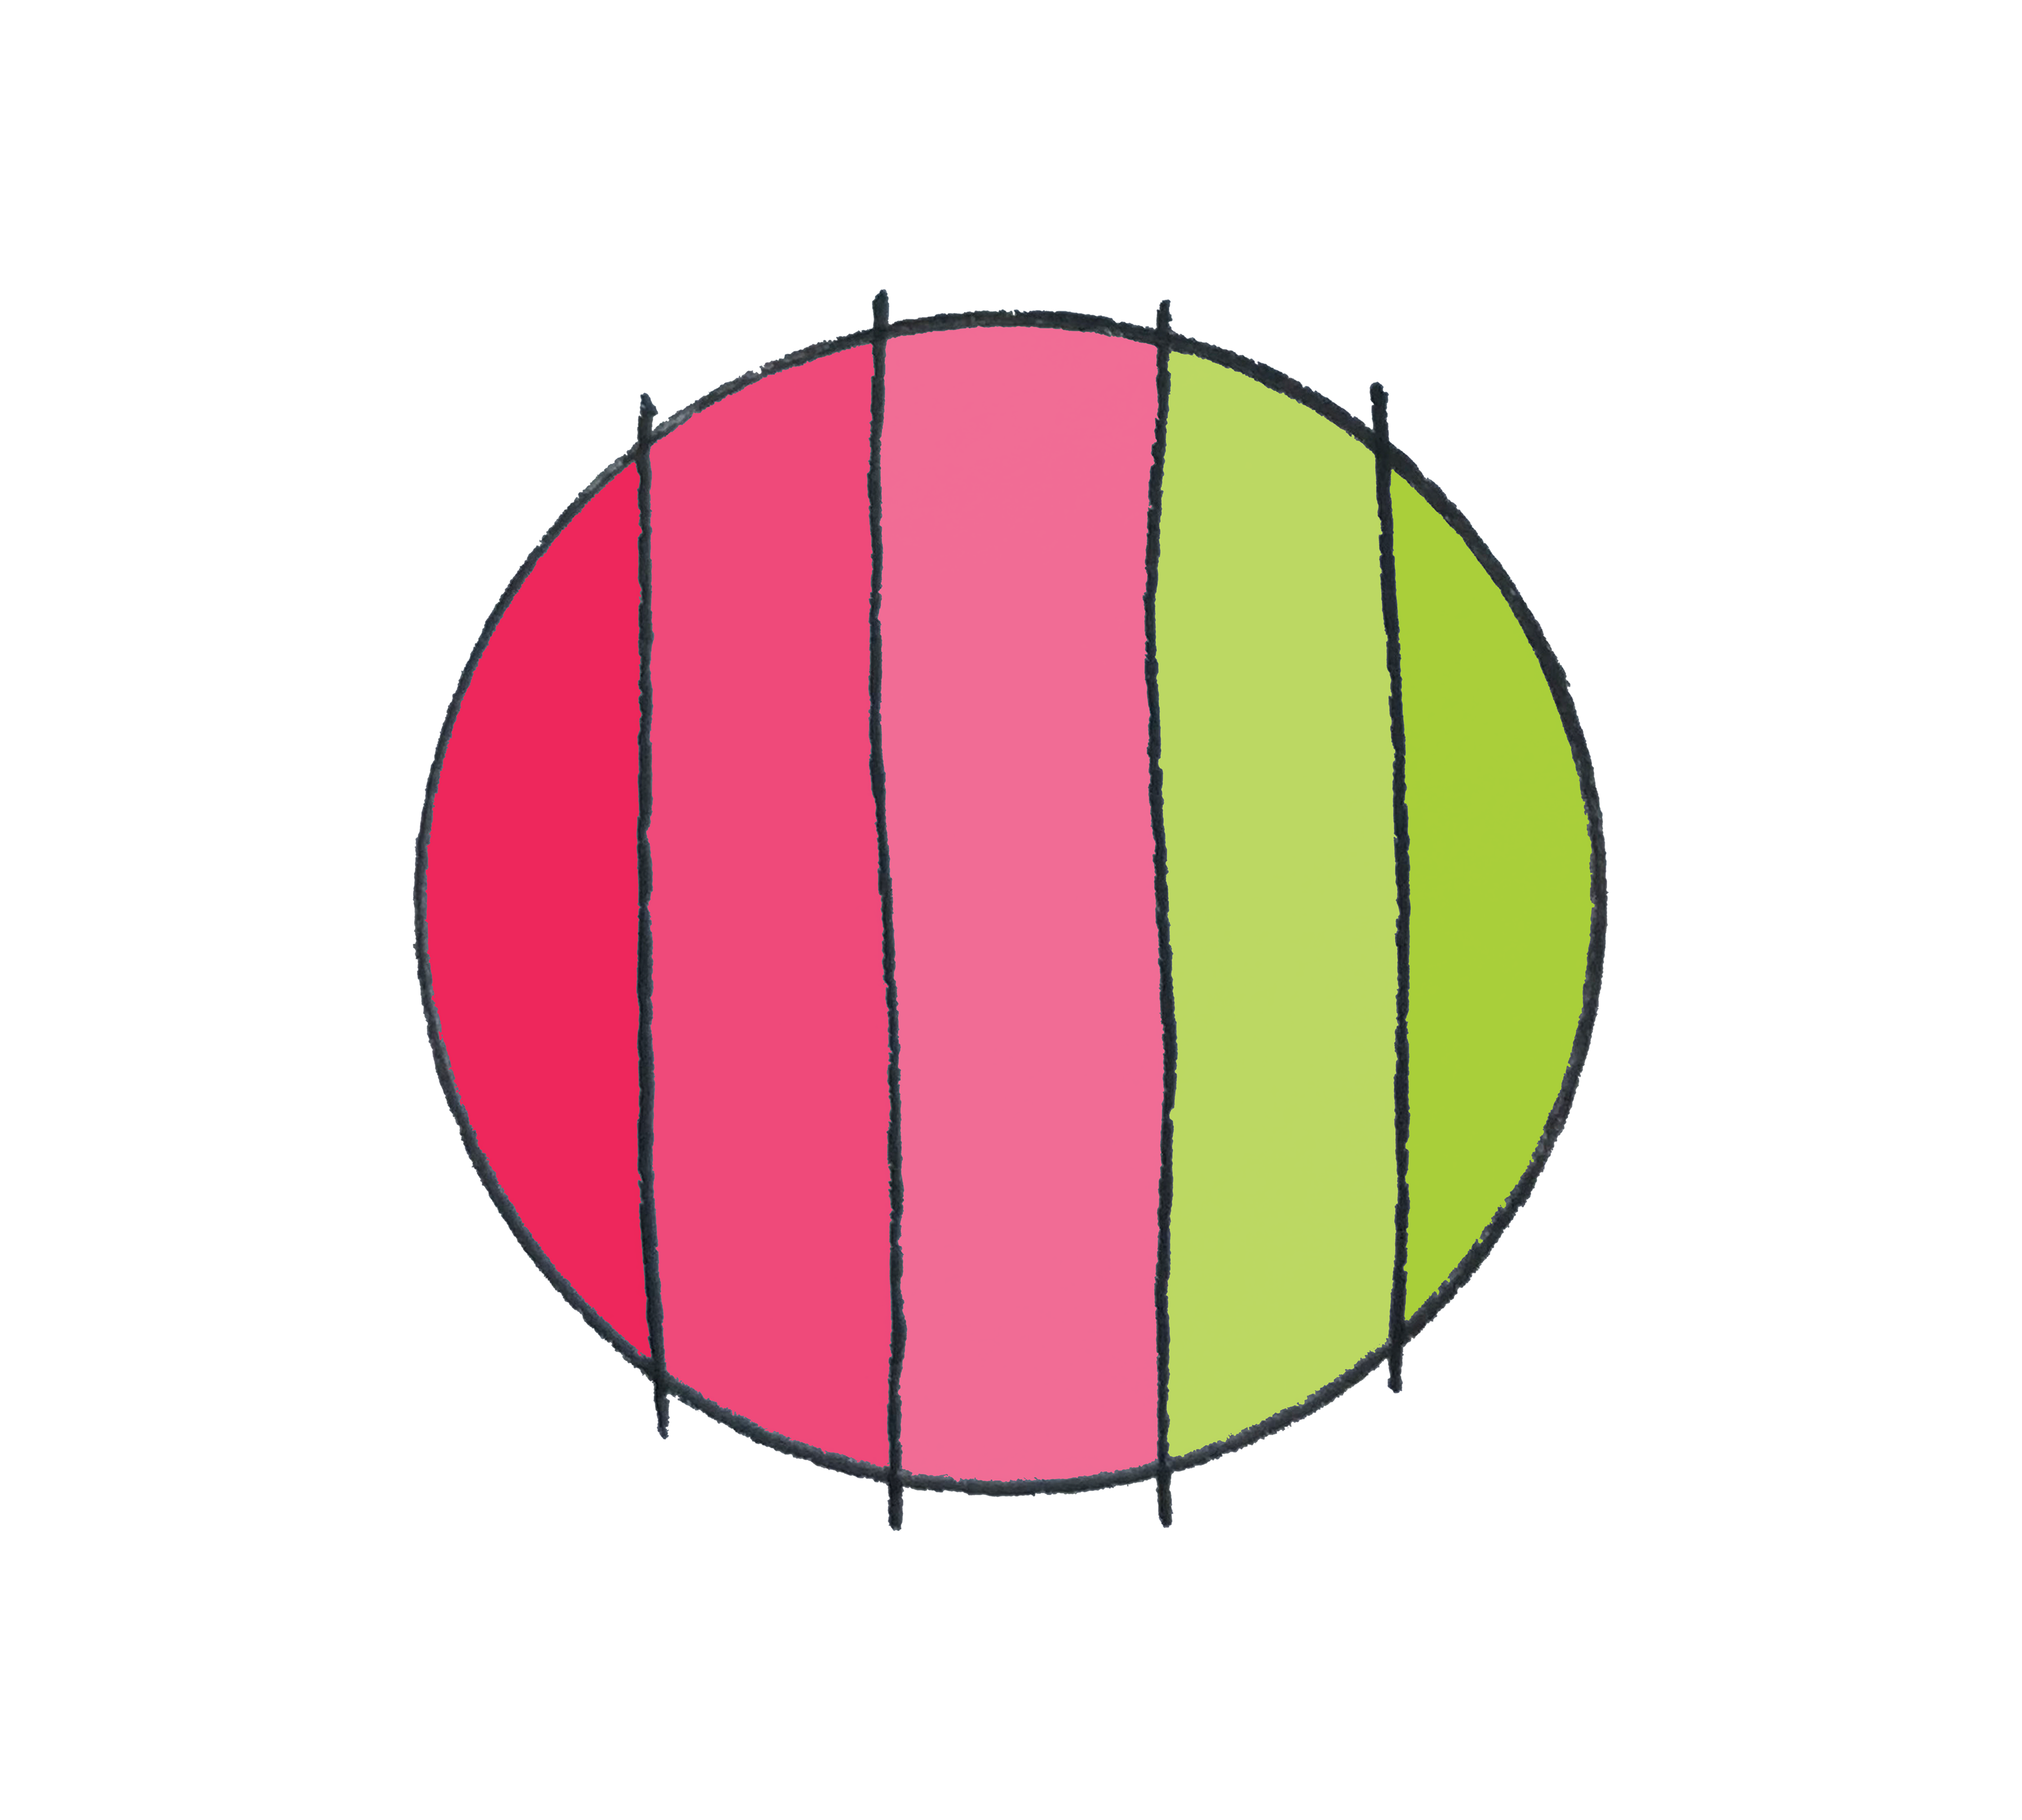 art every day number 348 circle sketch color pink green 00 97